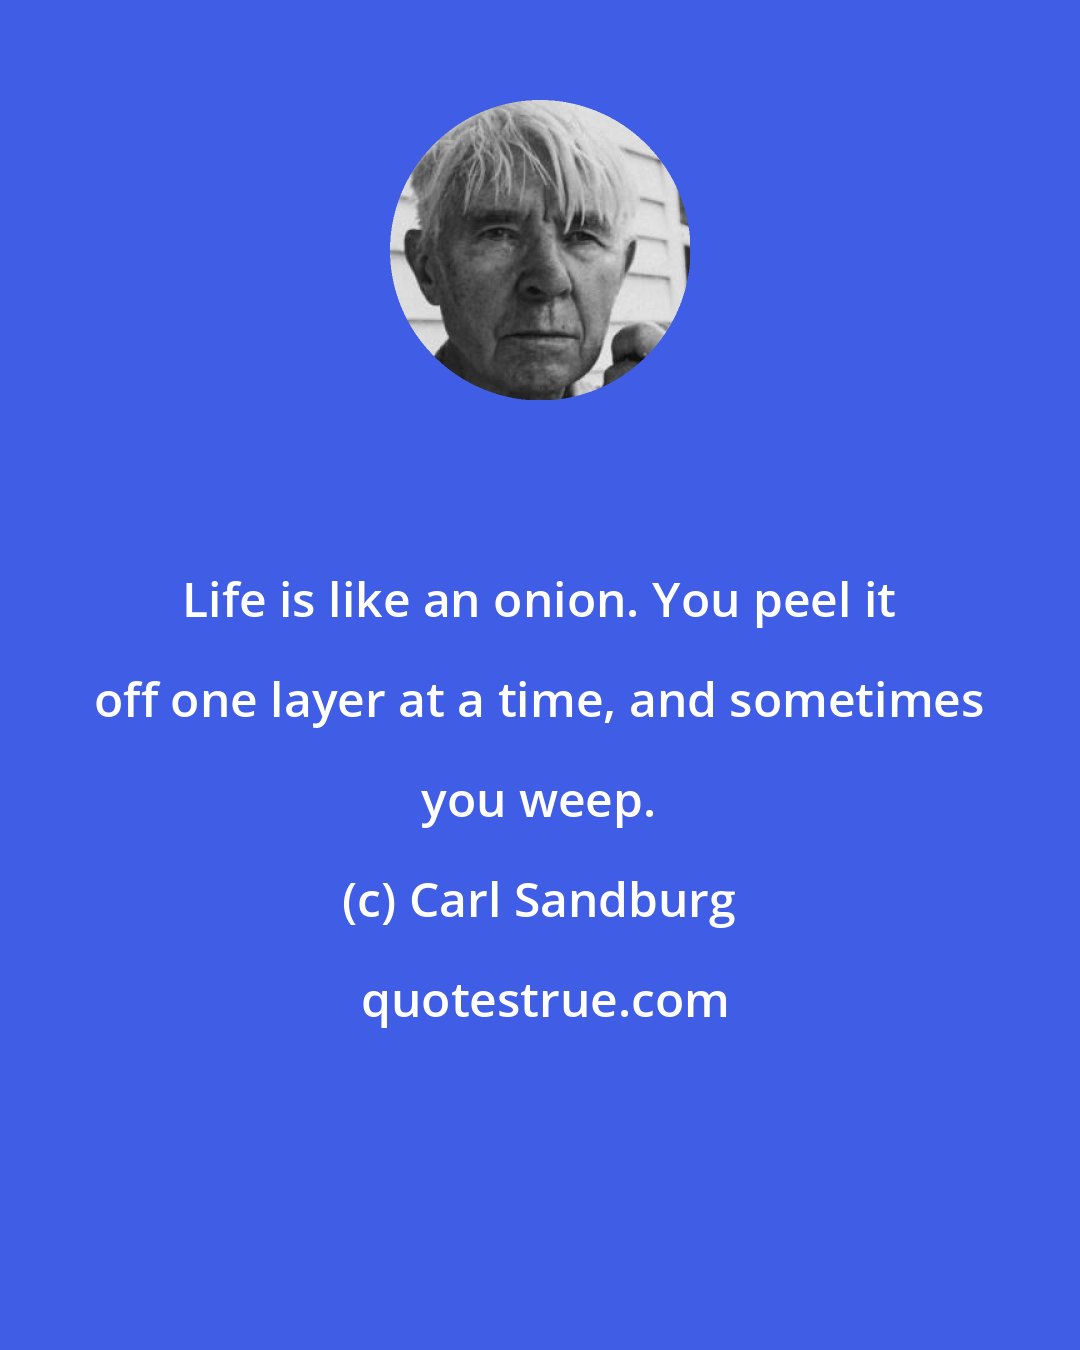 Carl Sandburg: Life is like an onion. You peel it off one layer at a time, and sometimes you weep.